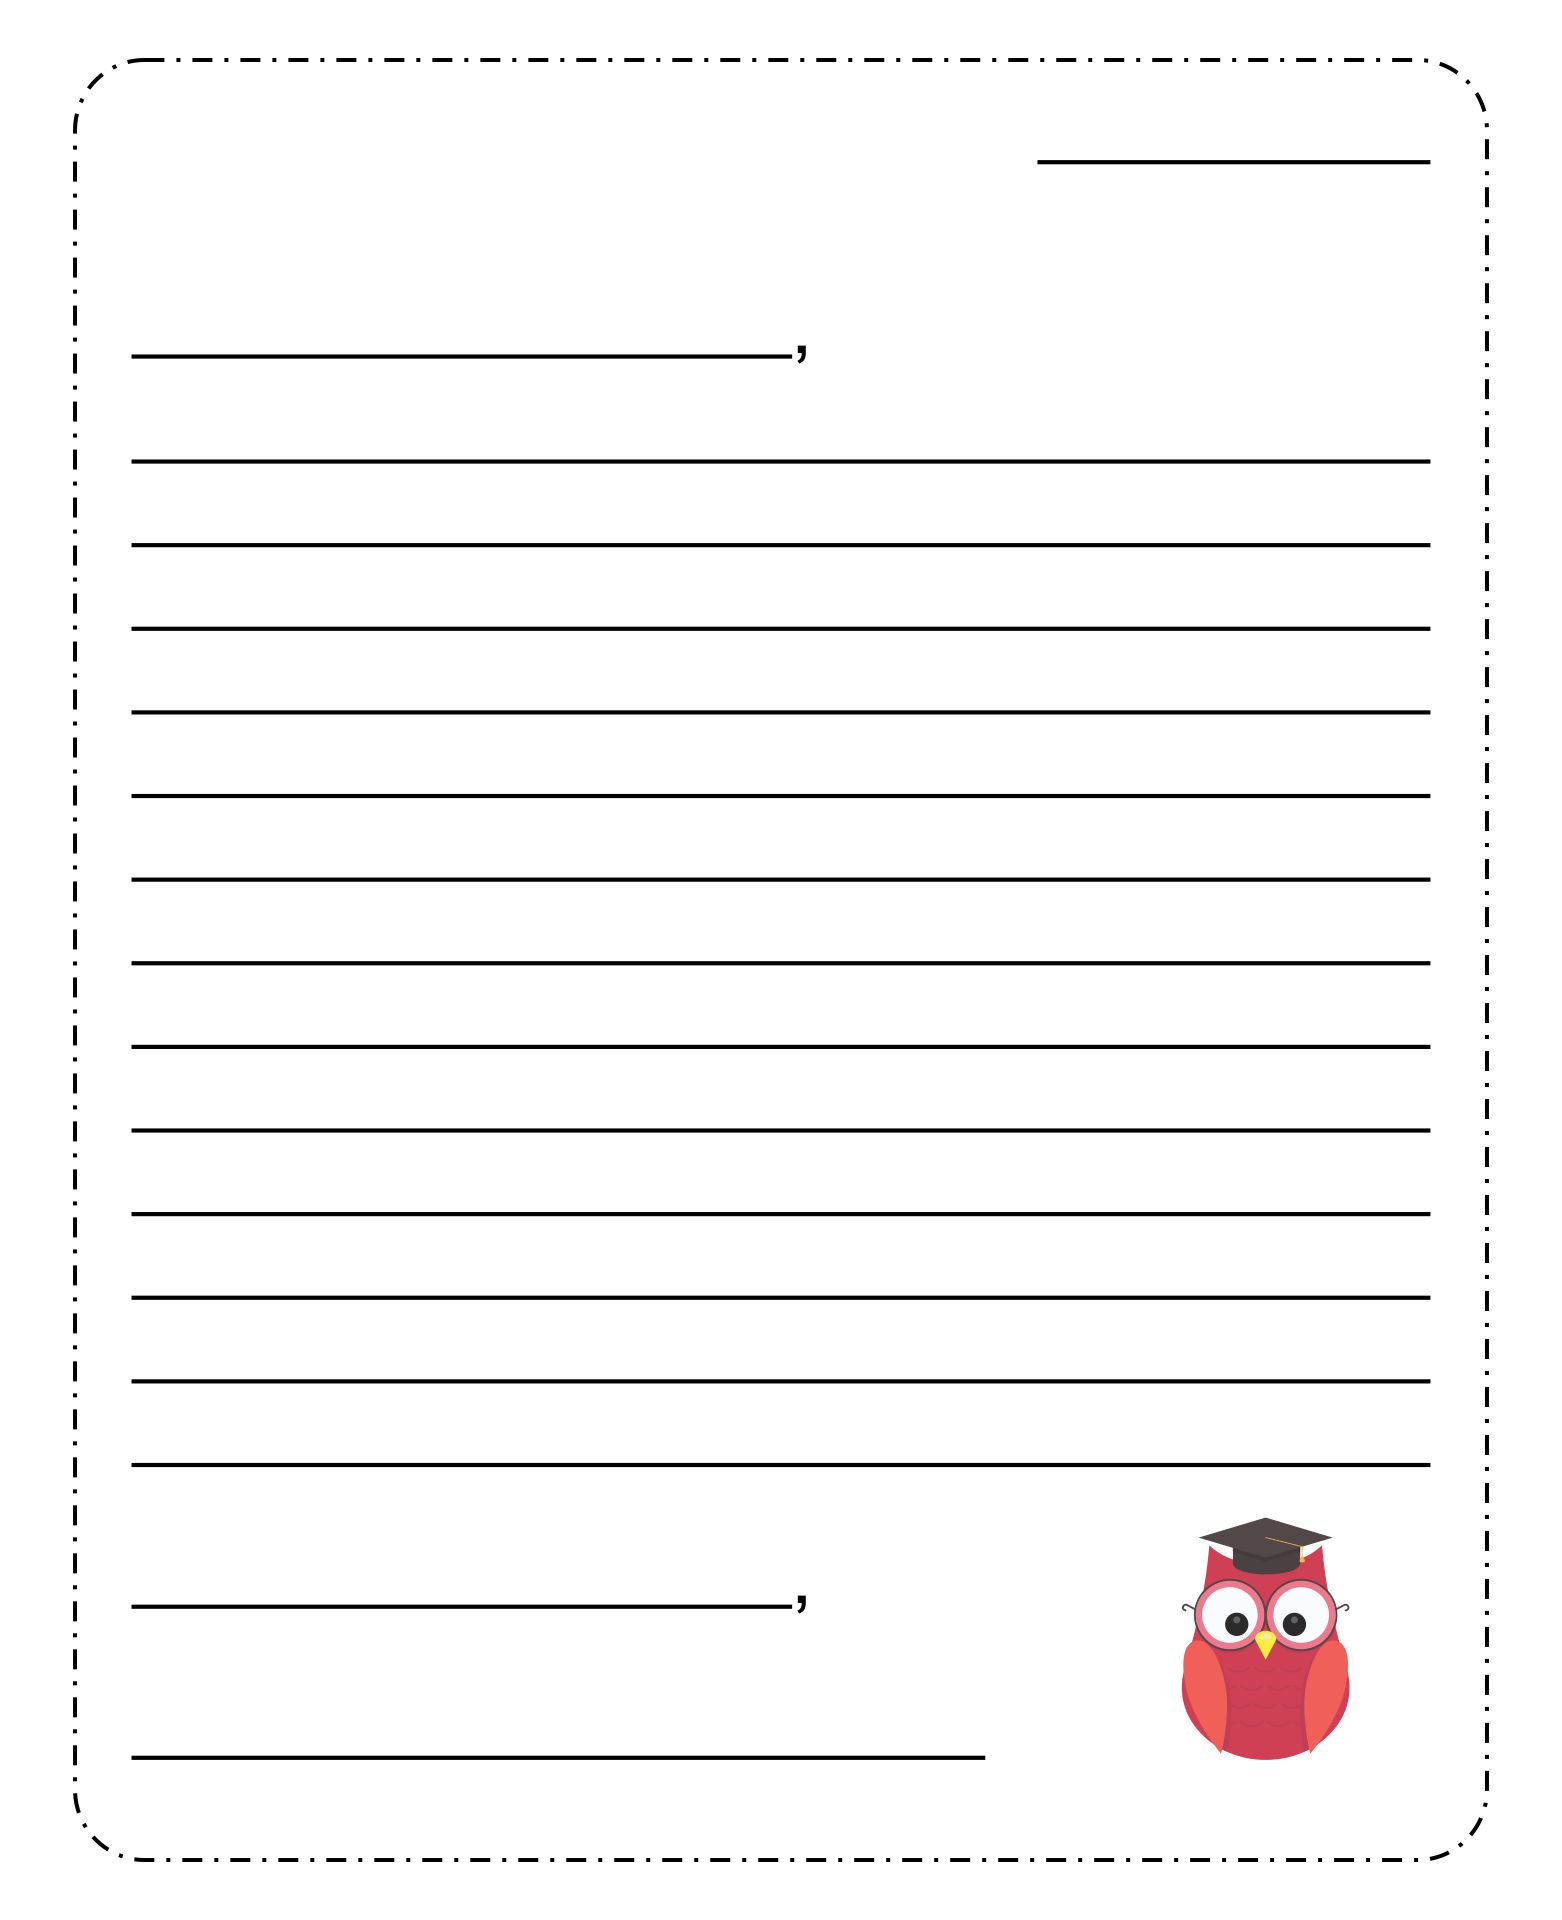 8 Best Images of Printable Blank Template Friendly Letter - Writing ...